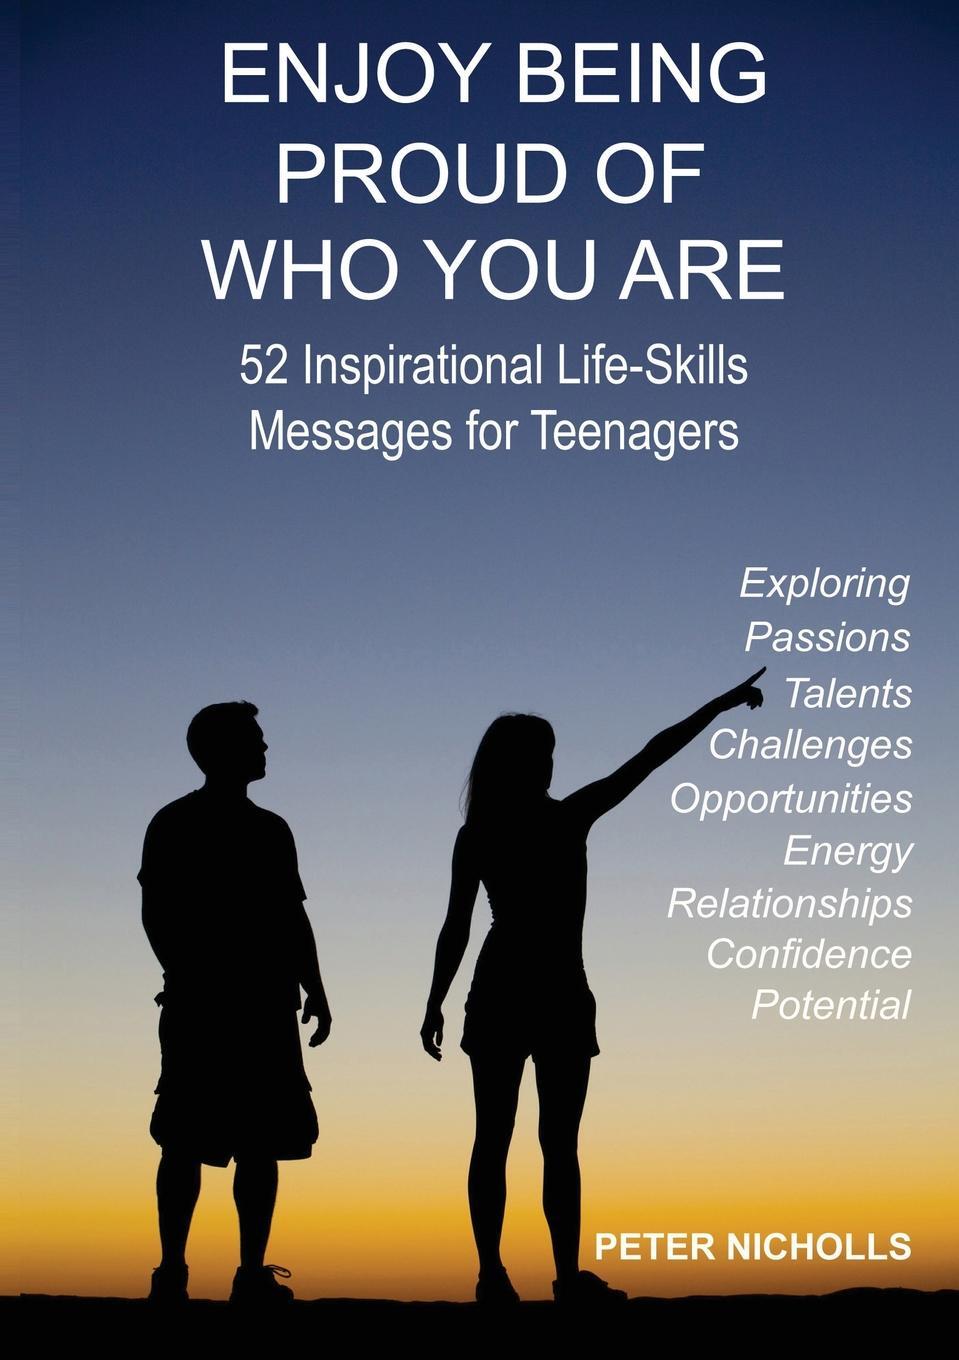 Are you enjoying the book. Be proud of who you are. Life inspiration. Work for teenagers.